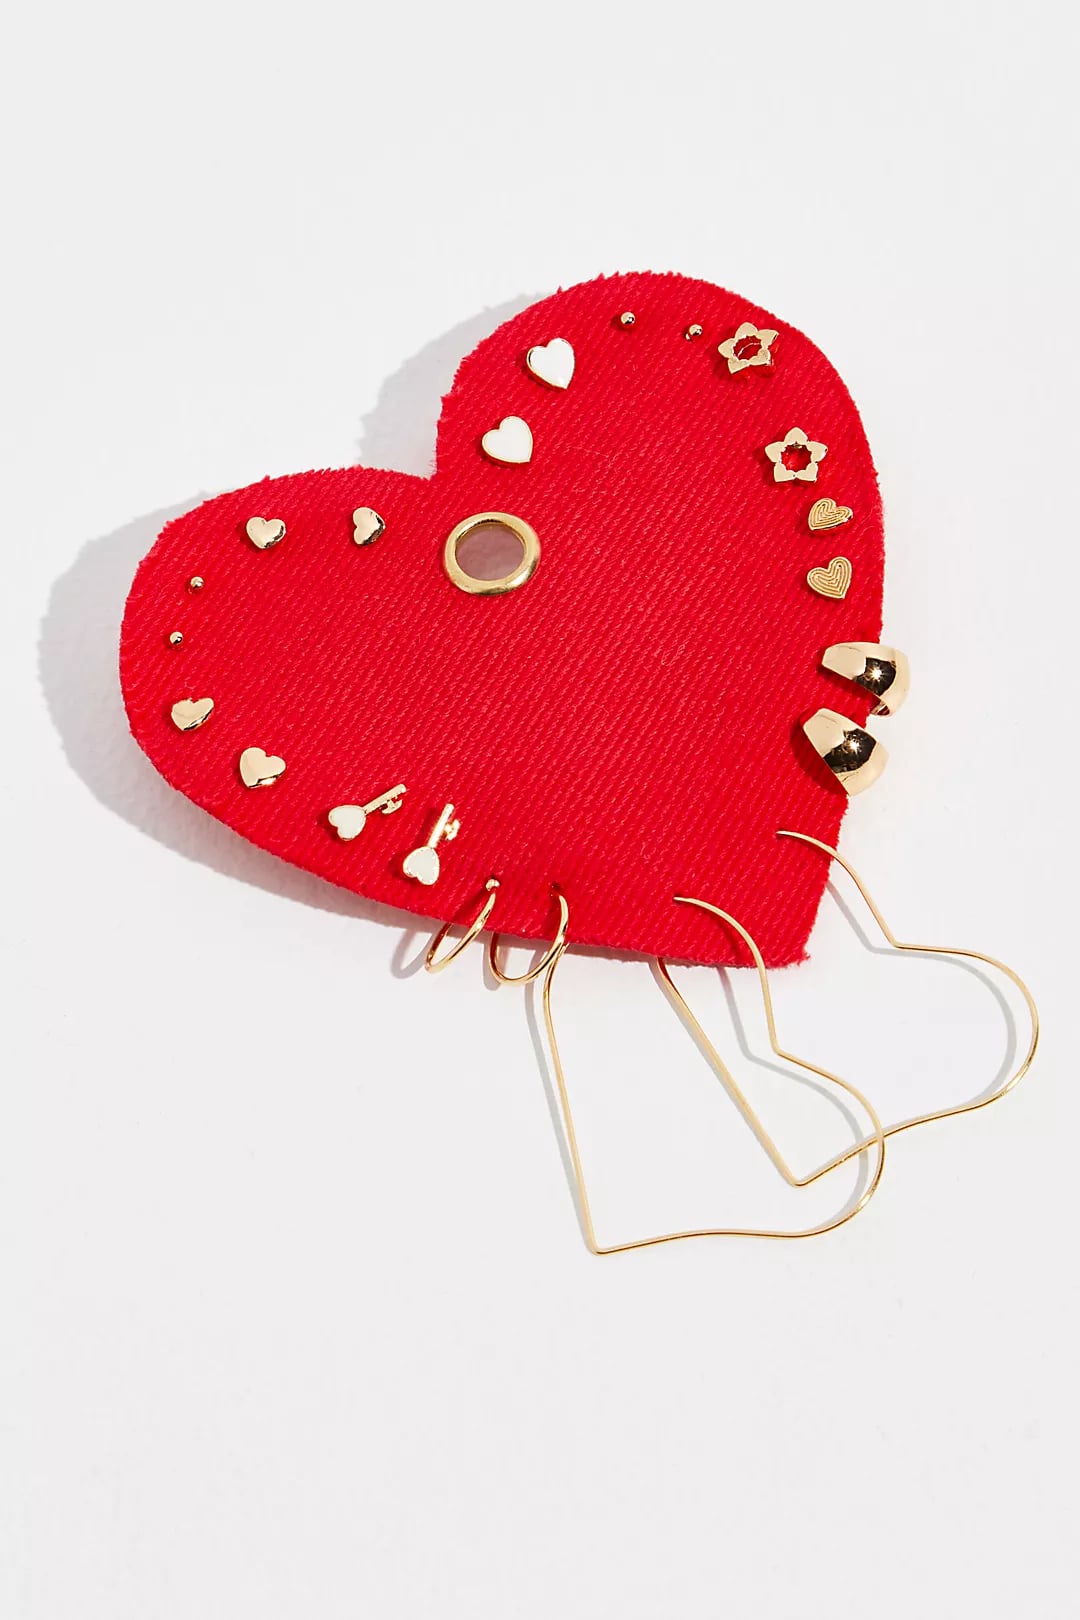 The Weekly Covet: The Sweetest Valentine's Day Gifts to Give (and